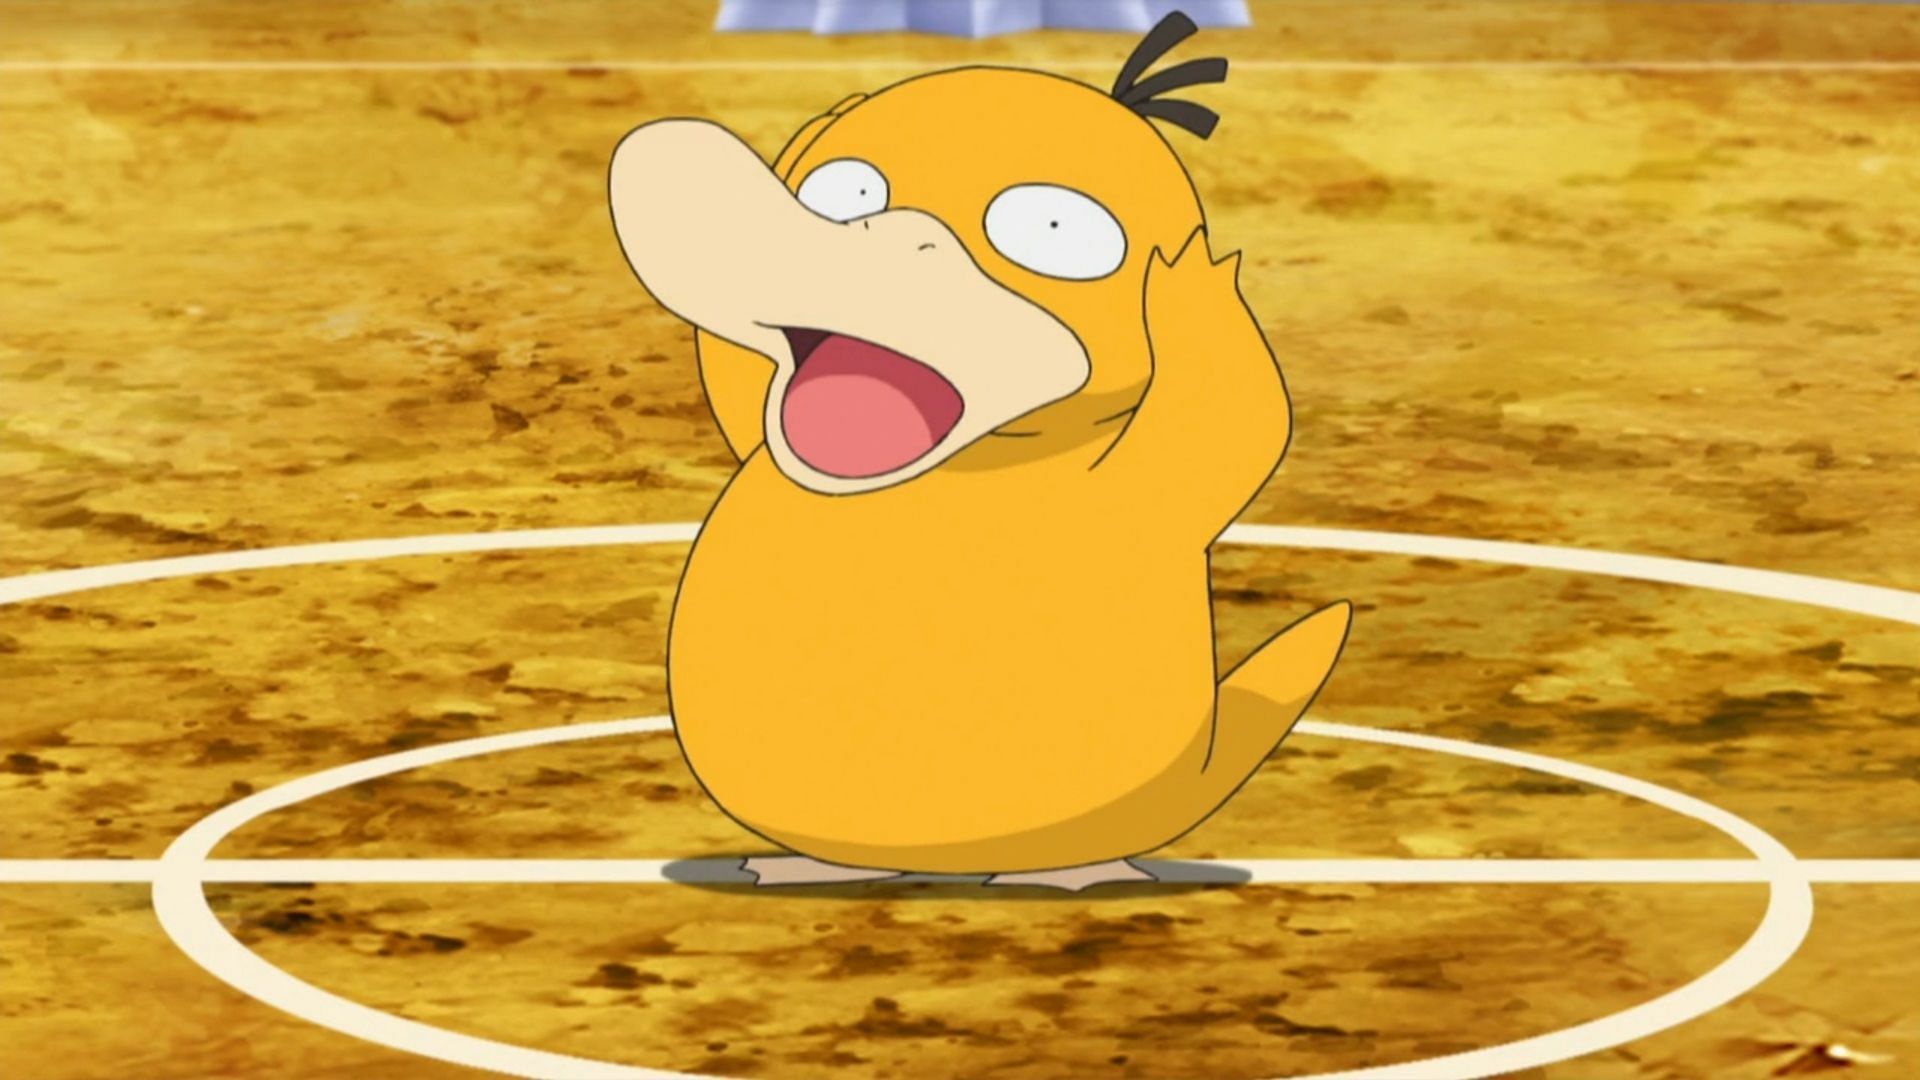 Psyduck as it appears in the anime (Image via The Pokemon Company)